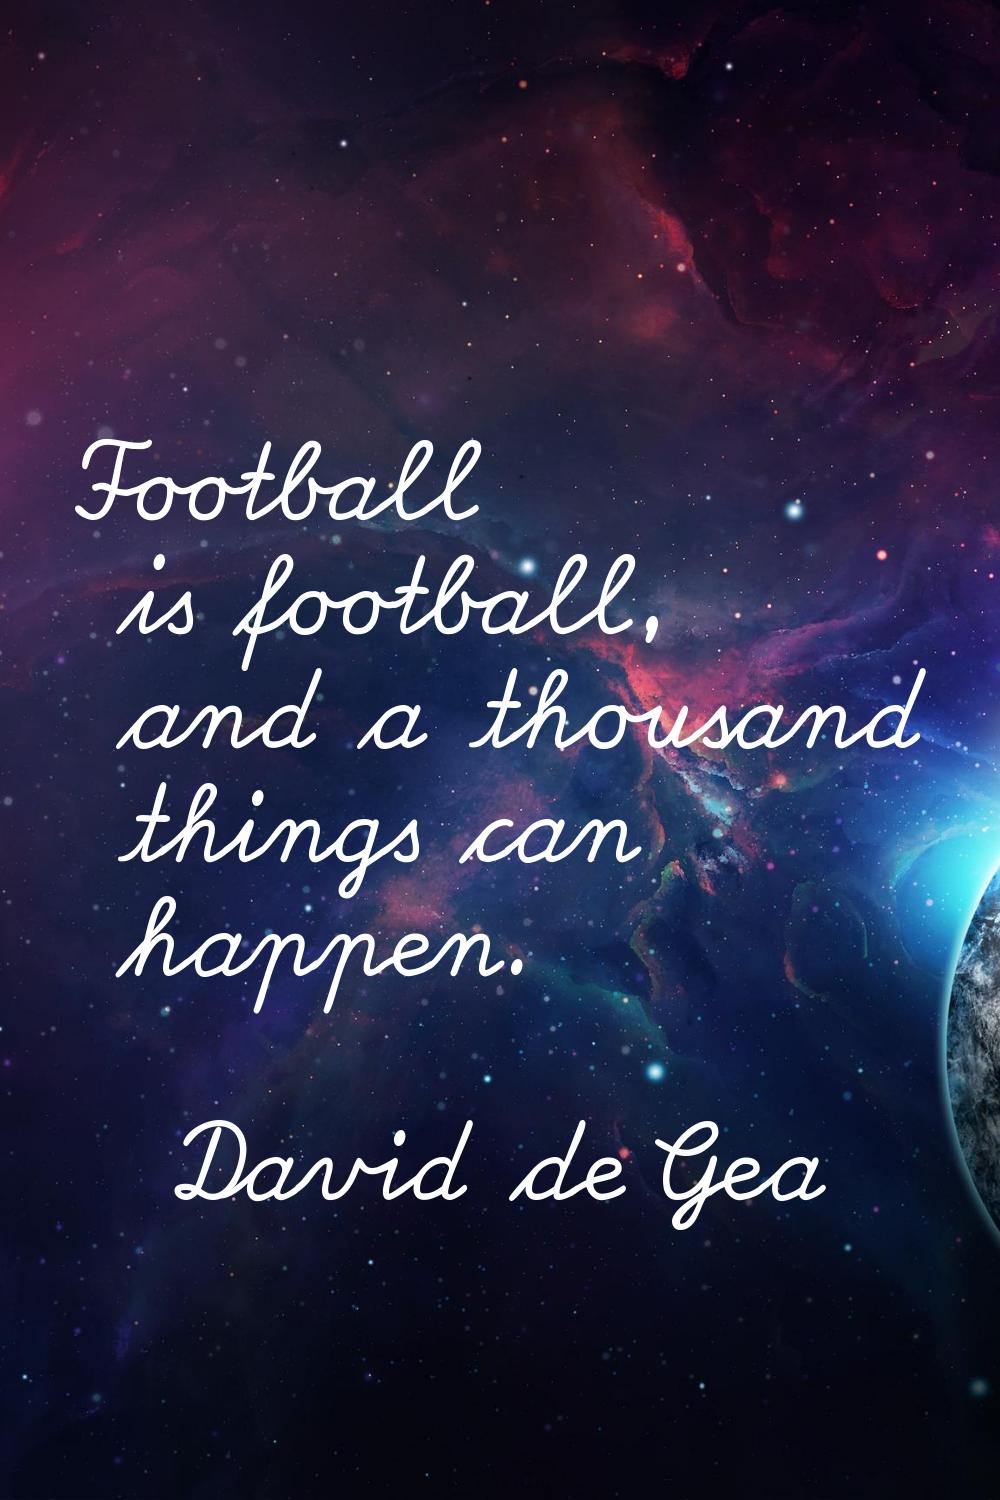 Football is football, and a thousand things can happen.